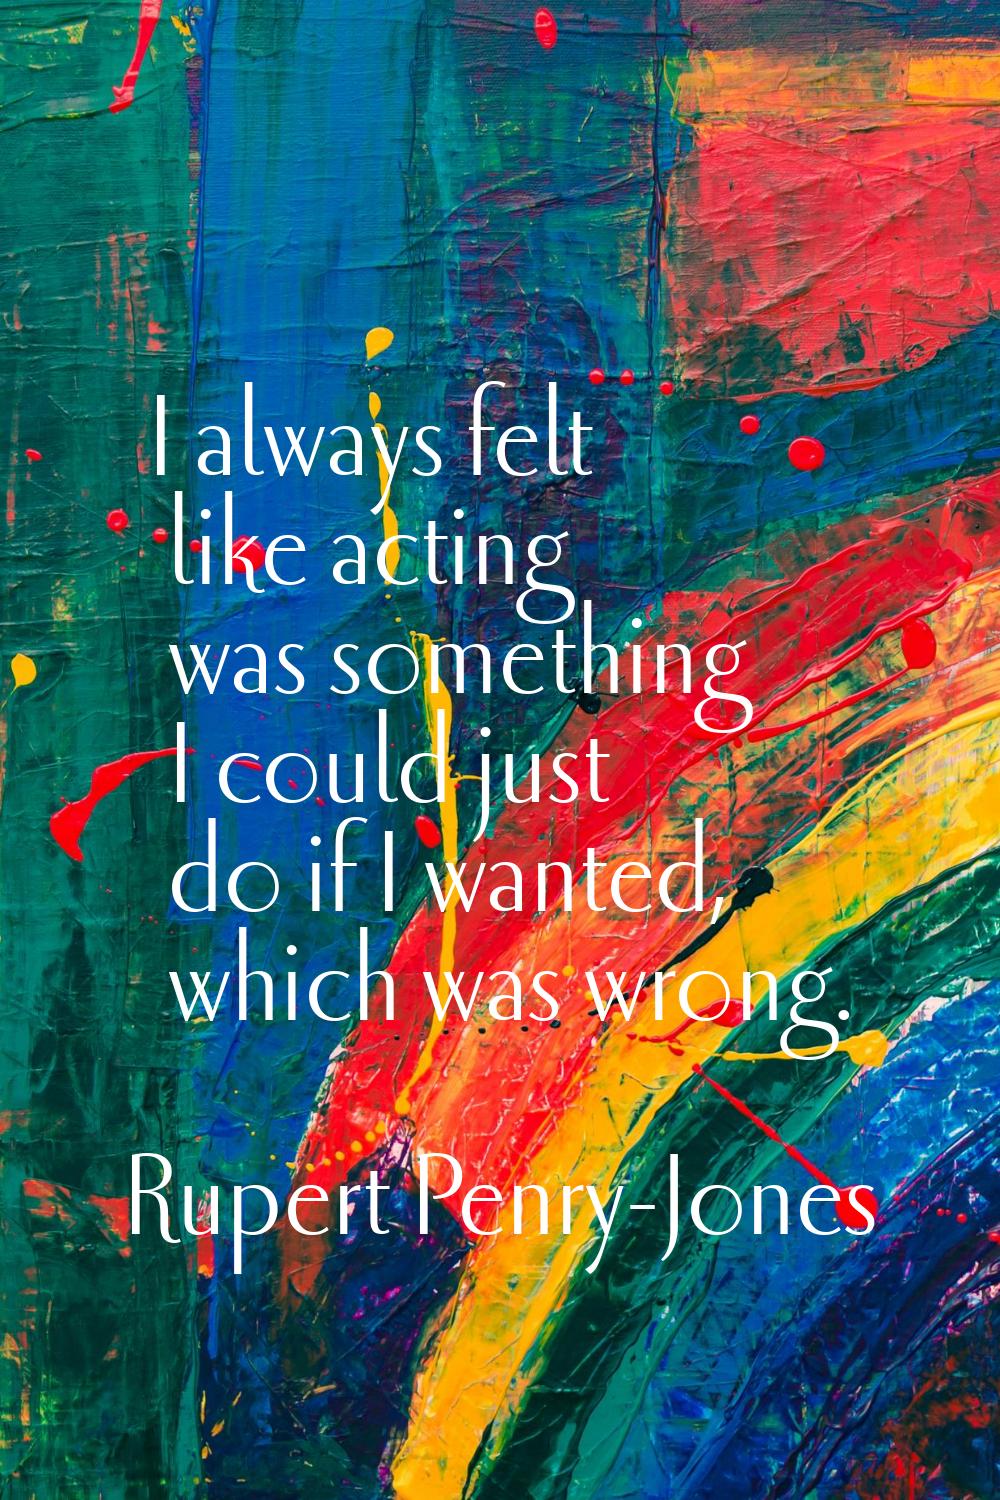 I always felt like acting was something I could just do if I wanted, which was wrong.